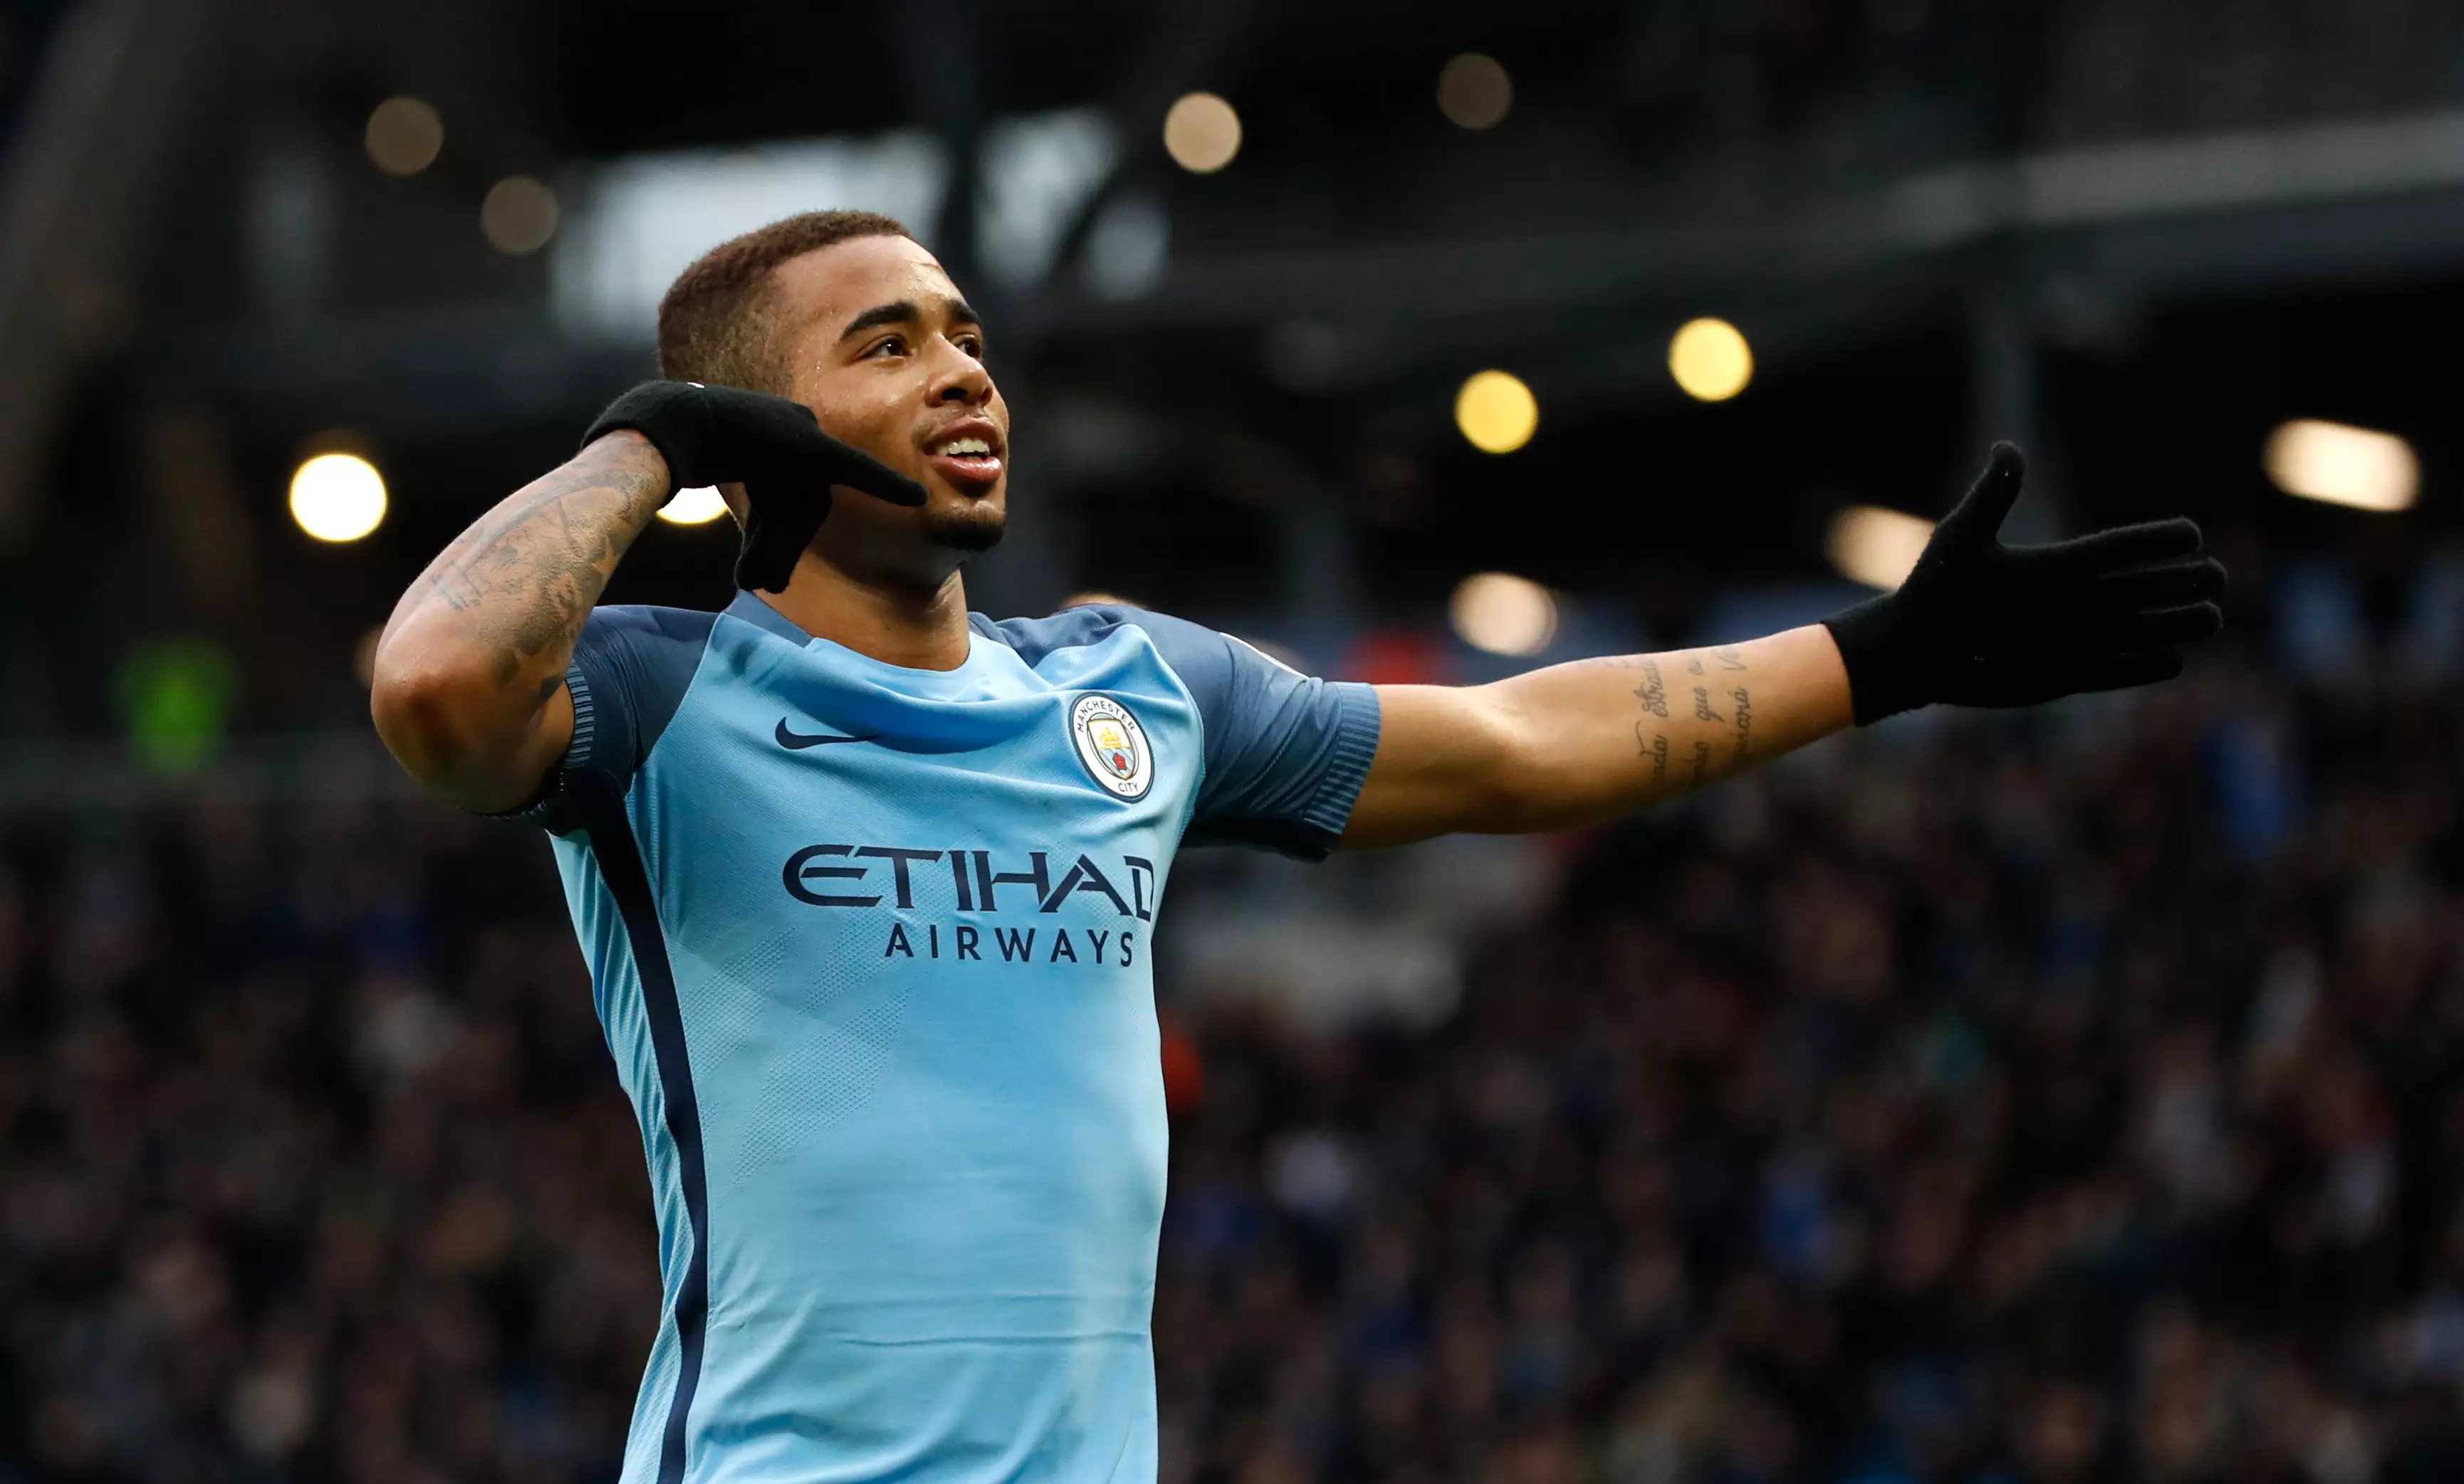 TheODDSbible's Gameweek 25 Premier League Betting Preview